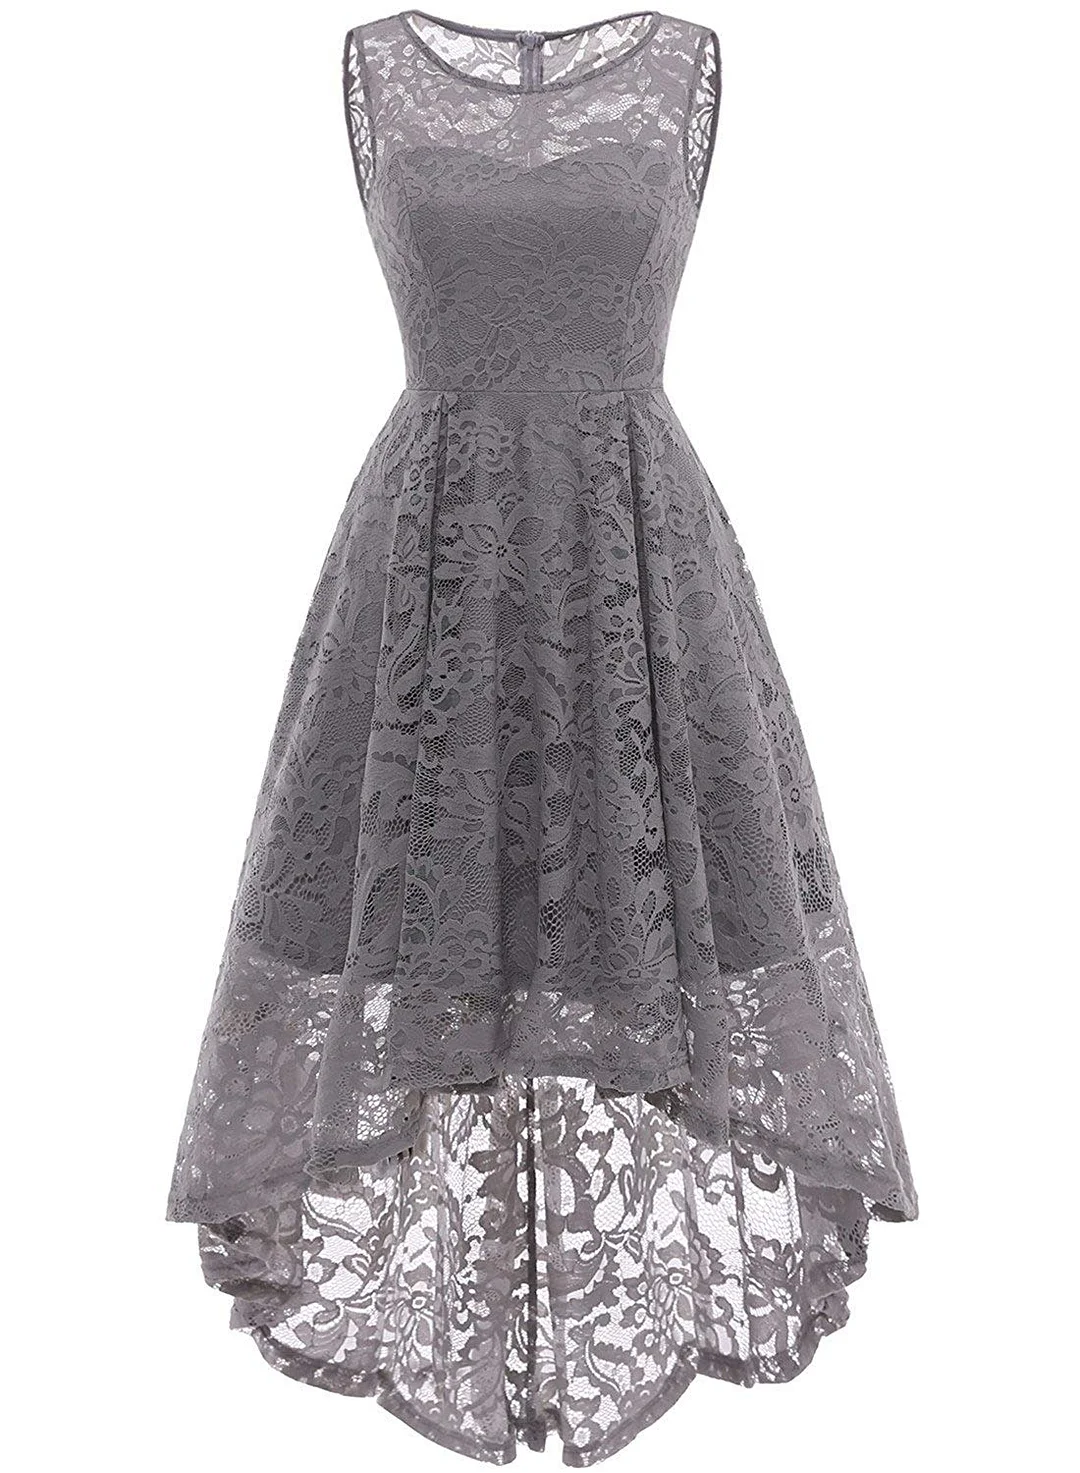 1950s Dress Women's Vintage Floral Lace Sleeveless Hi-Lo Cocktail Formal Swing Dress